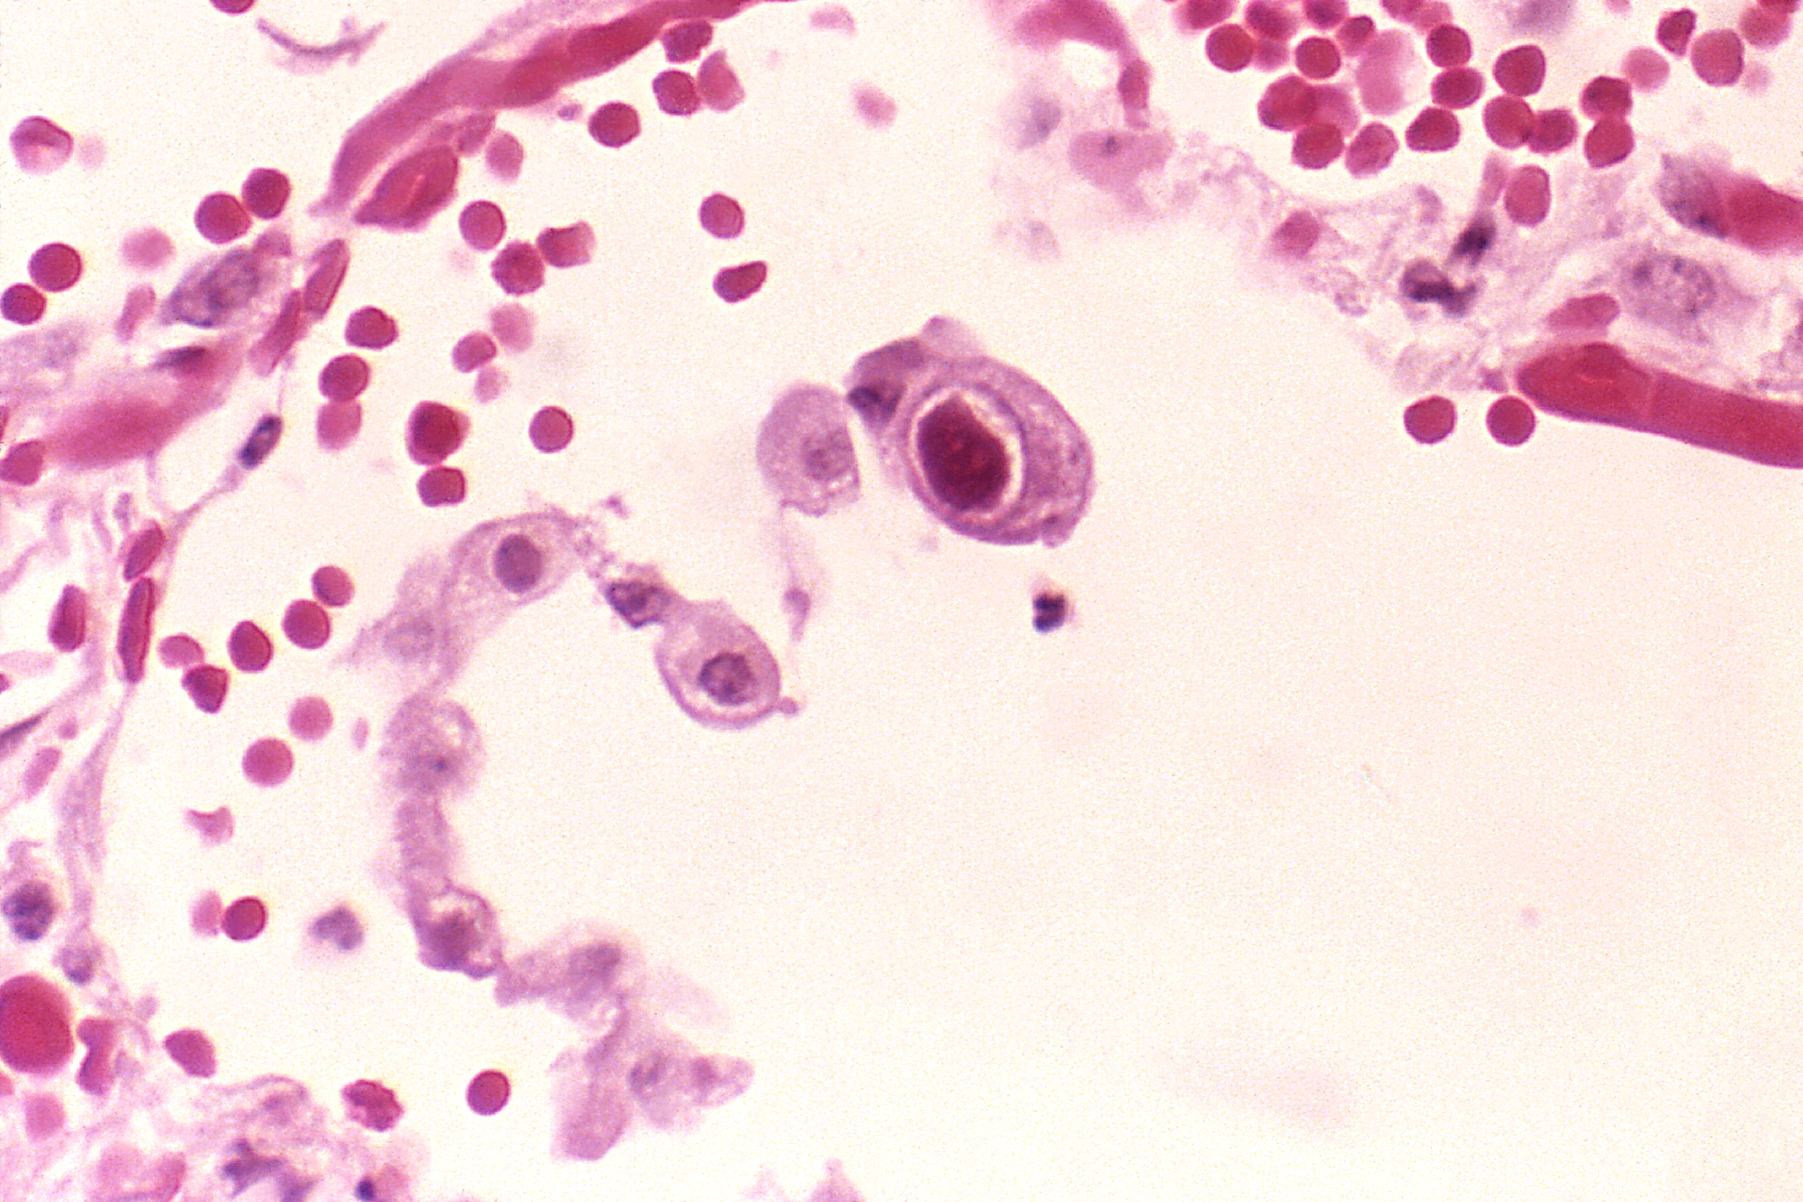 Pneumocytes (a type of cell in the lungs) infected with CMV. The central cell displays the dramatically enlarged nuclei characteristic of CMV